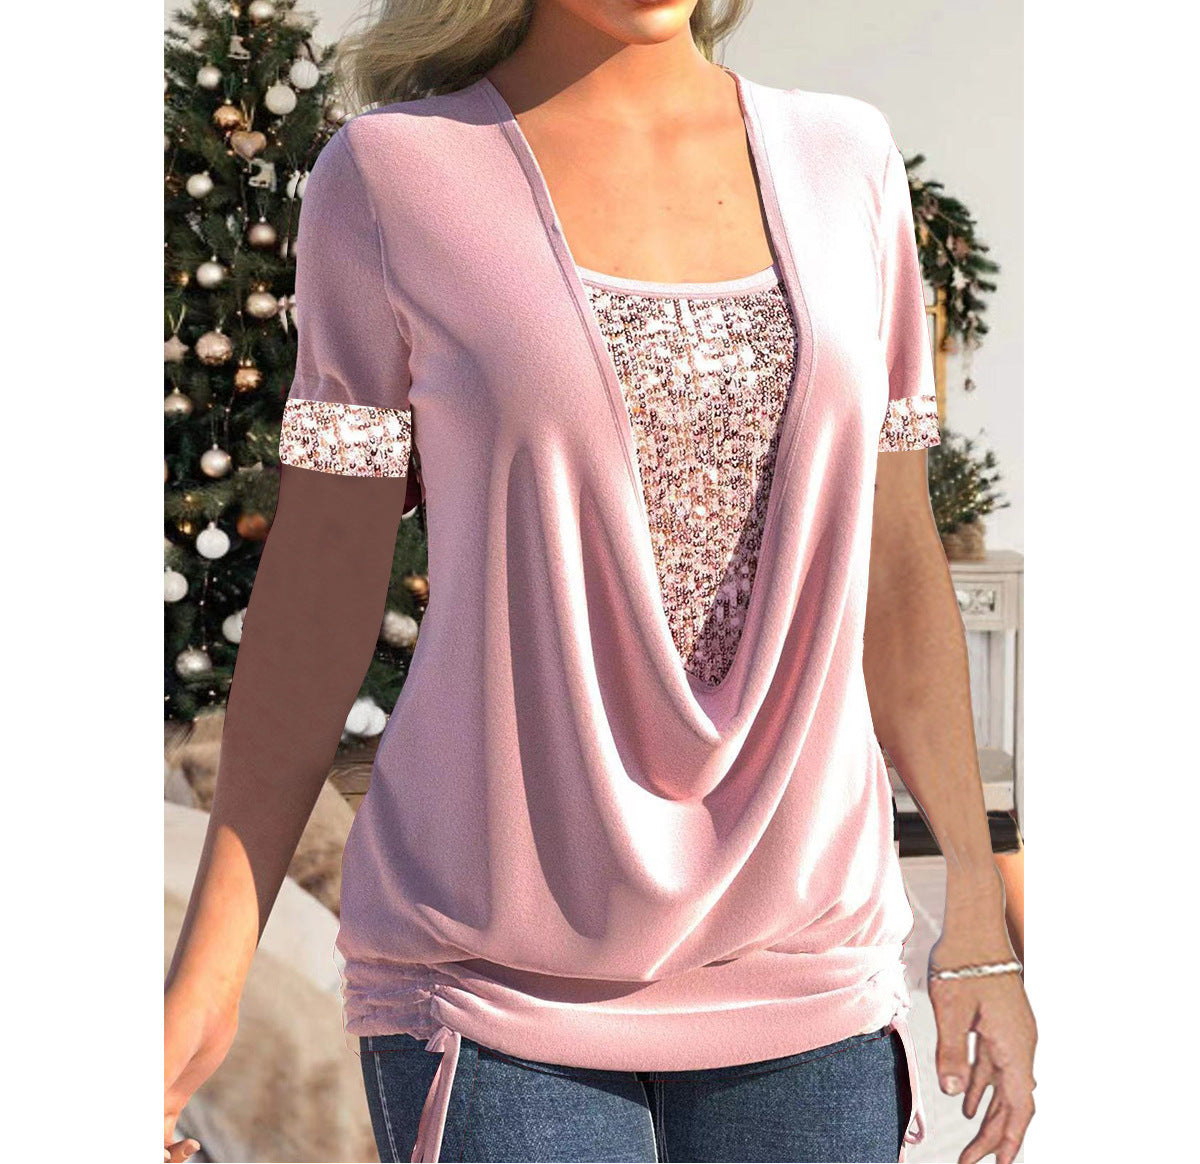 Women's Sequin Contrast Solid Color Short-sleeved Large Drop Collar Loose Blouses